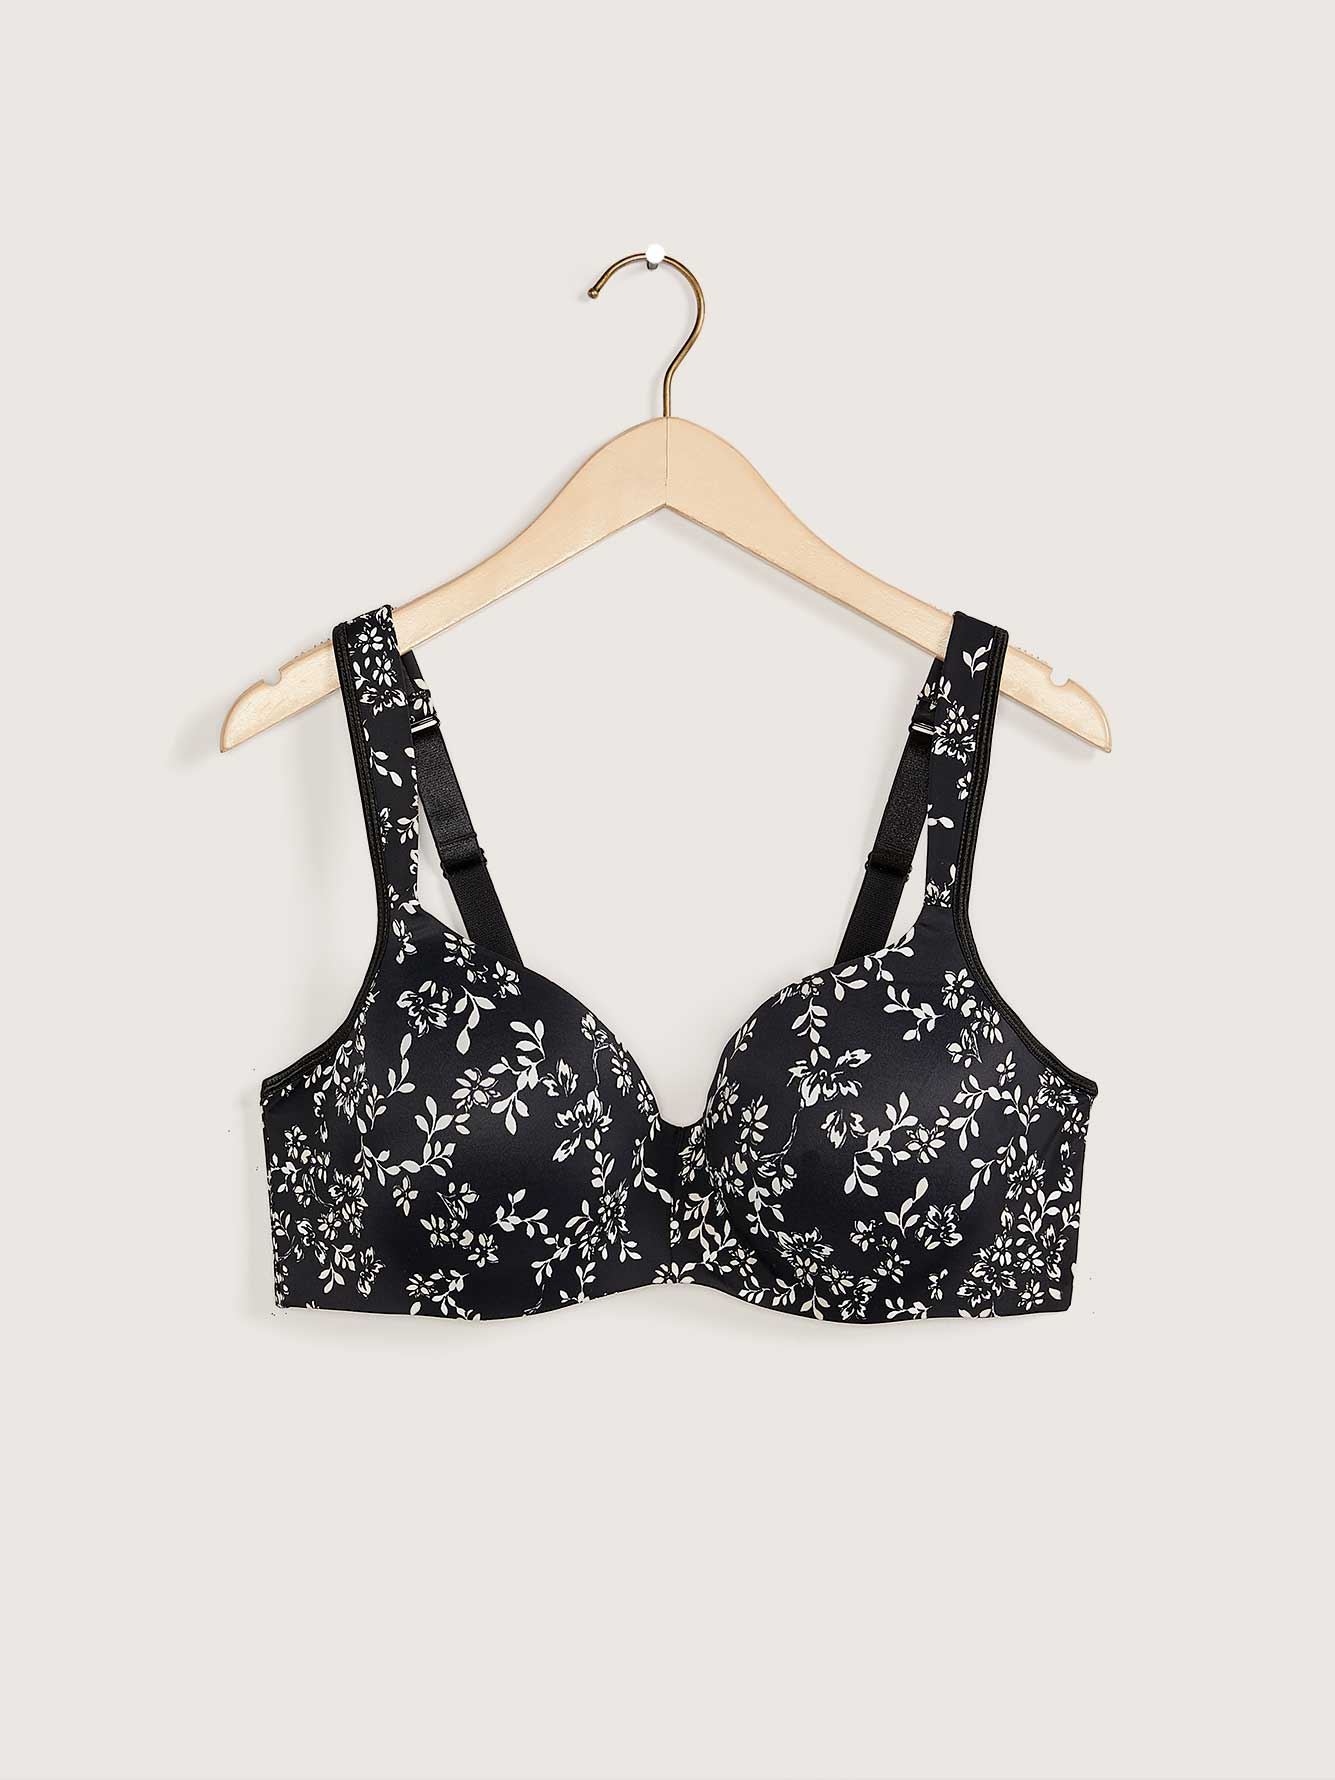 44g tshirt bra voglo From Penningtons. Underwired Bra 44g For Good Support.  